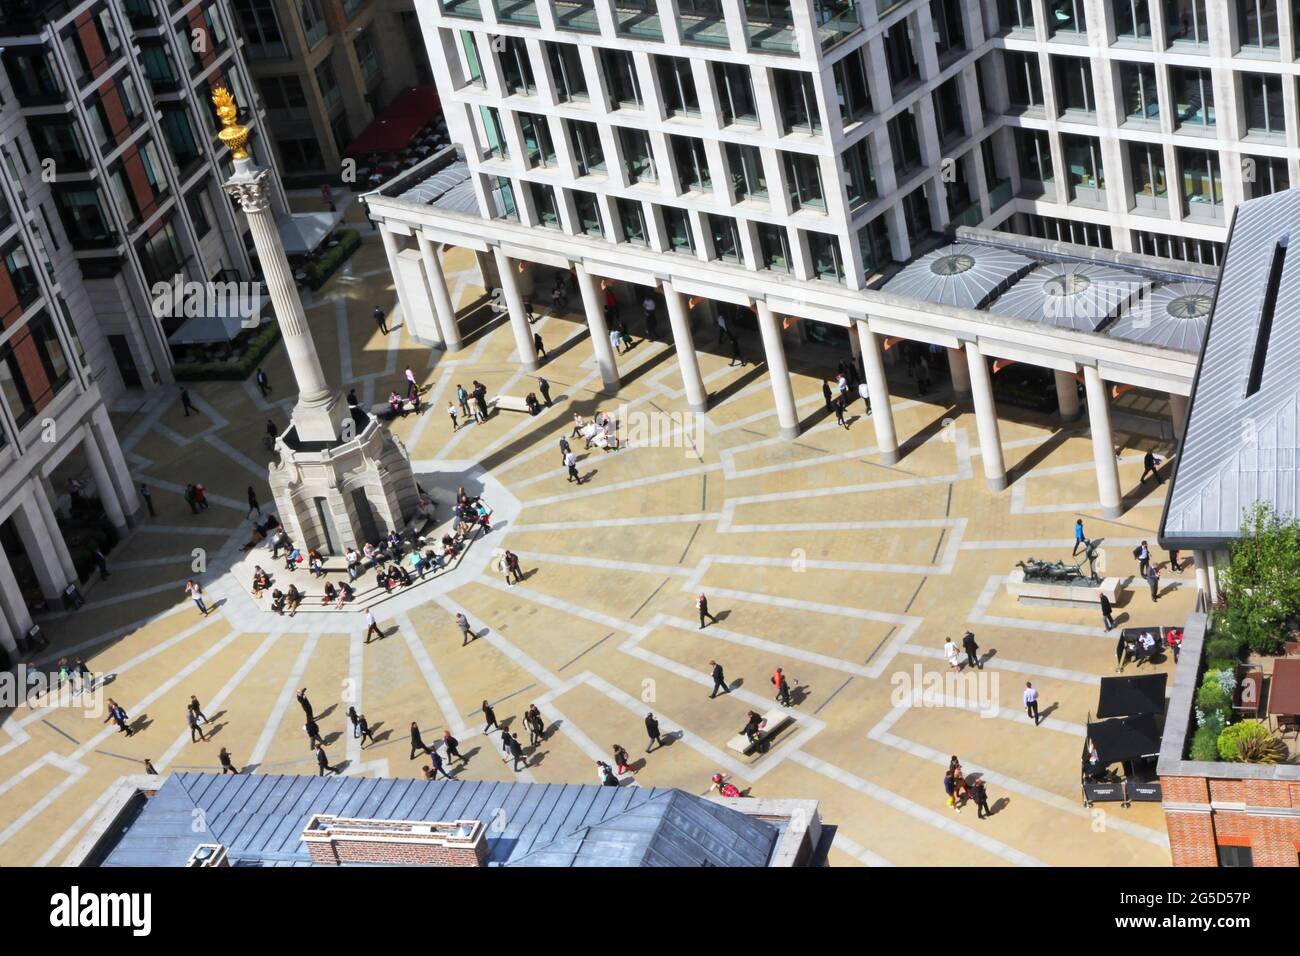 Paternoster Square in central London near to St Paul's Cathedral Stock Photo